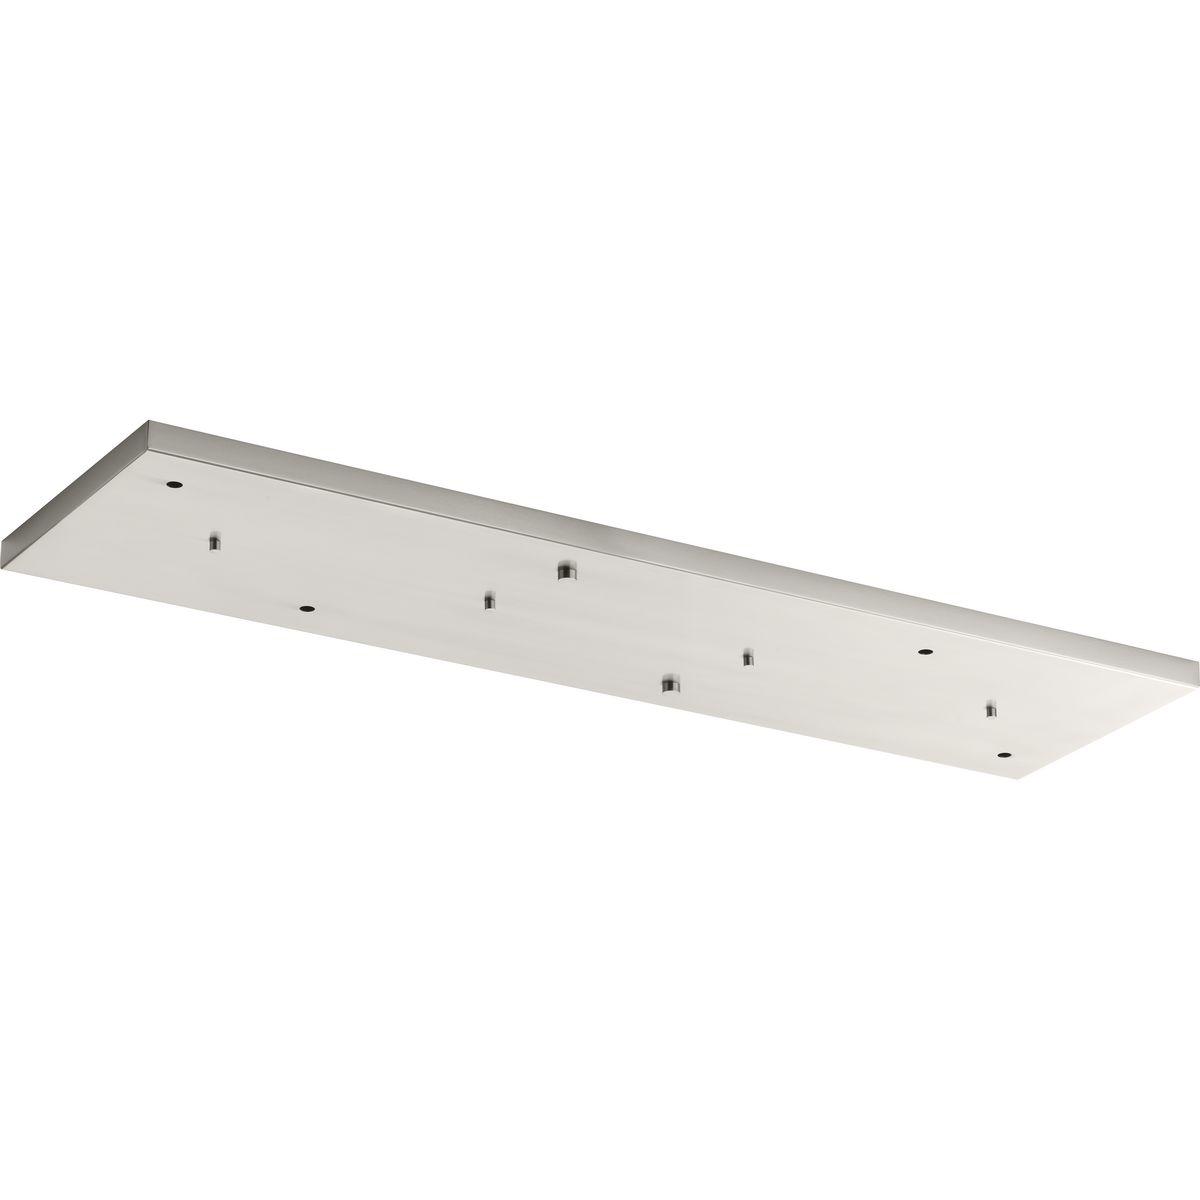 Hubbell P860005-009 Progress Lighting's canopy accessory offers a convenient way to mount groupings of pendants. This rectangle pendant accessory allows for the hanging of six pendants off of one outlet box. Pendants can be hung straight or staggered. The maximum pendant wid